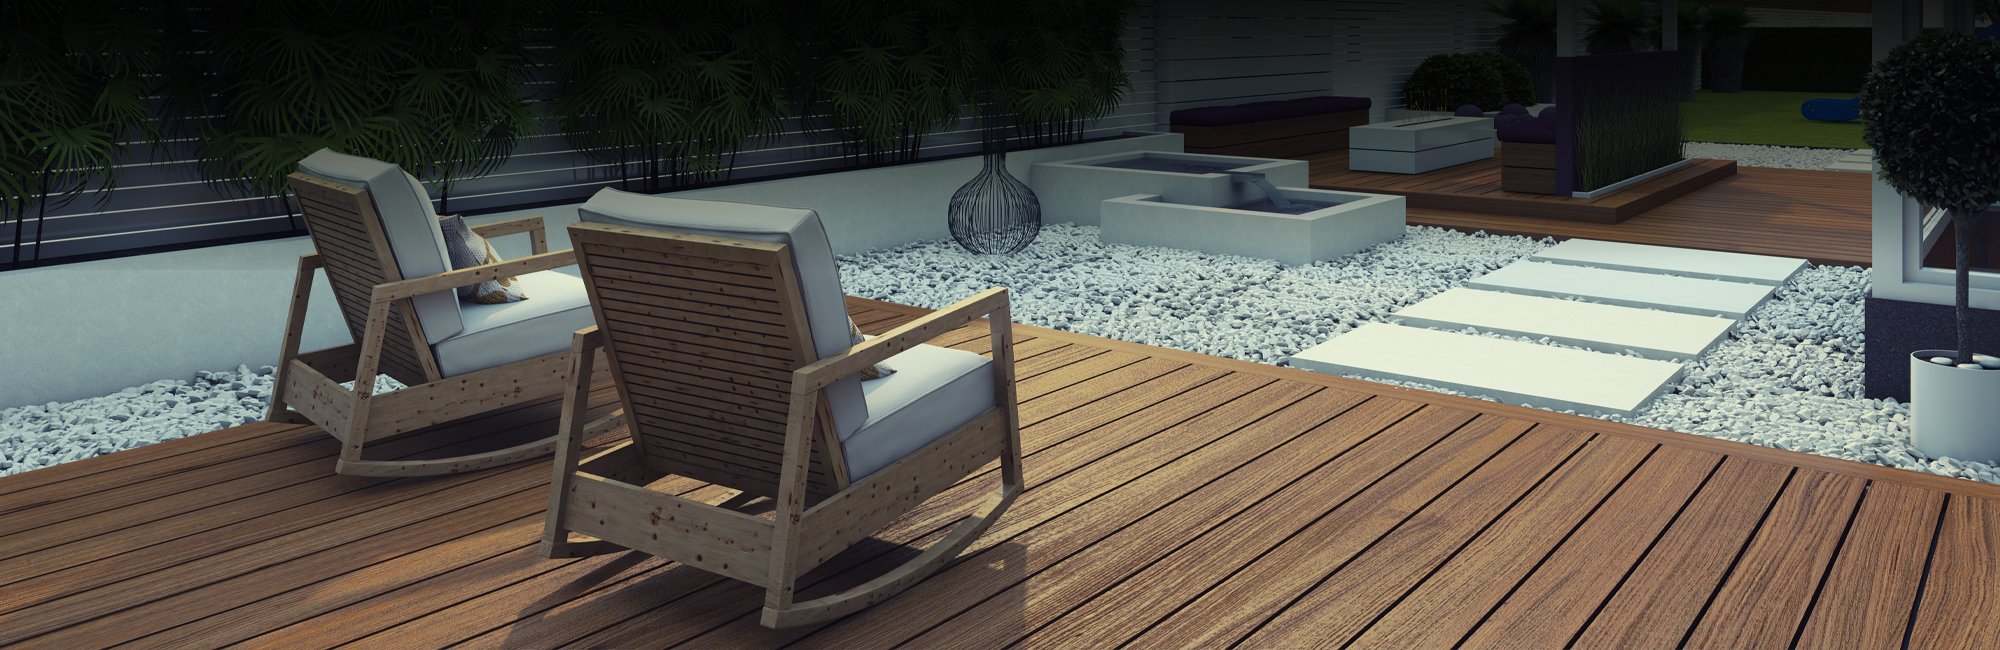 Two outdoor deck areas separated by a large pebble area with large white stone tiles to walk on between the two